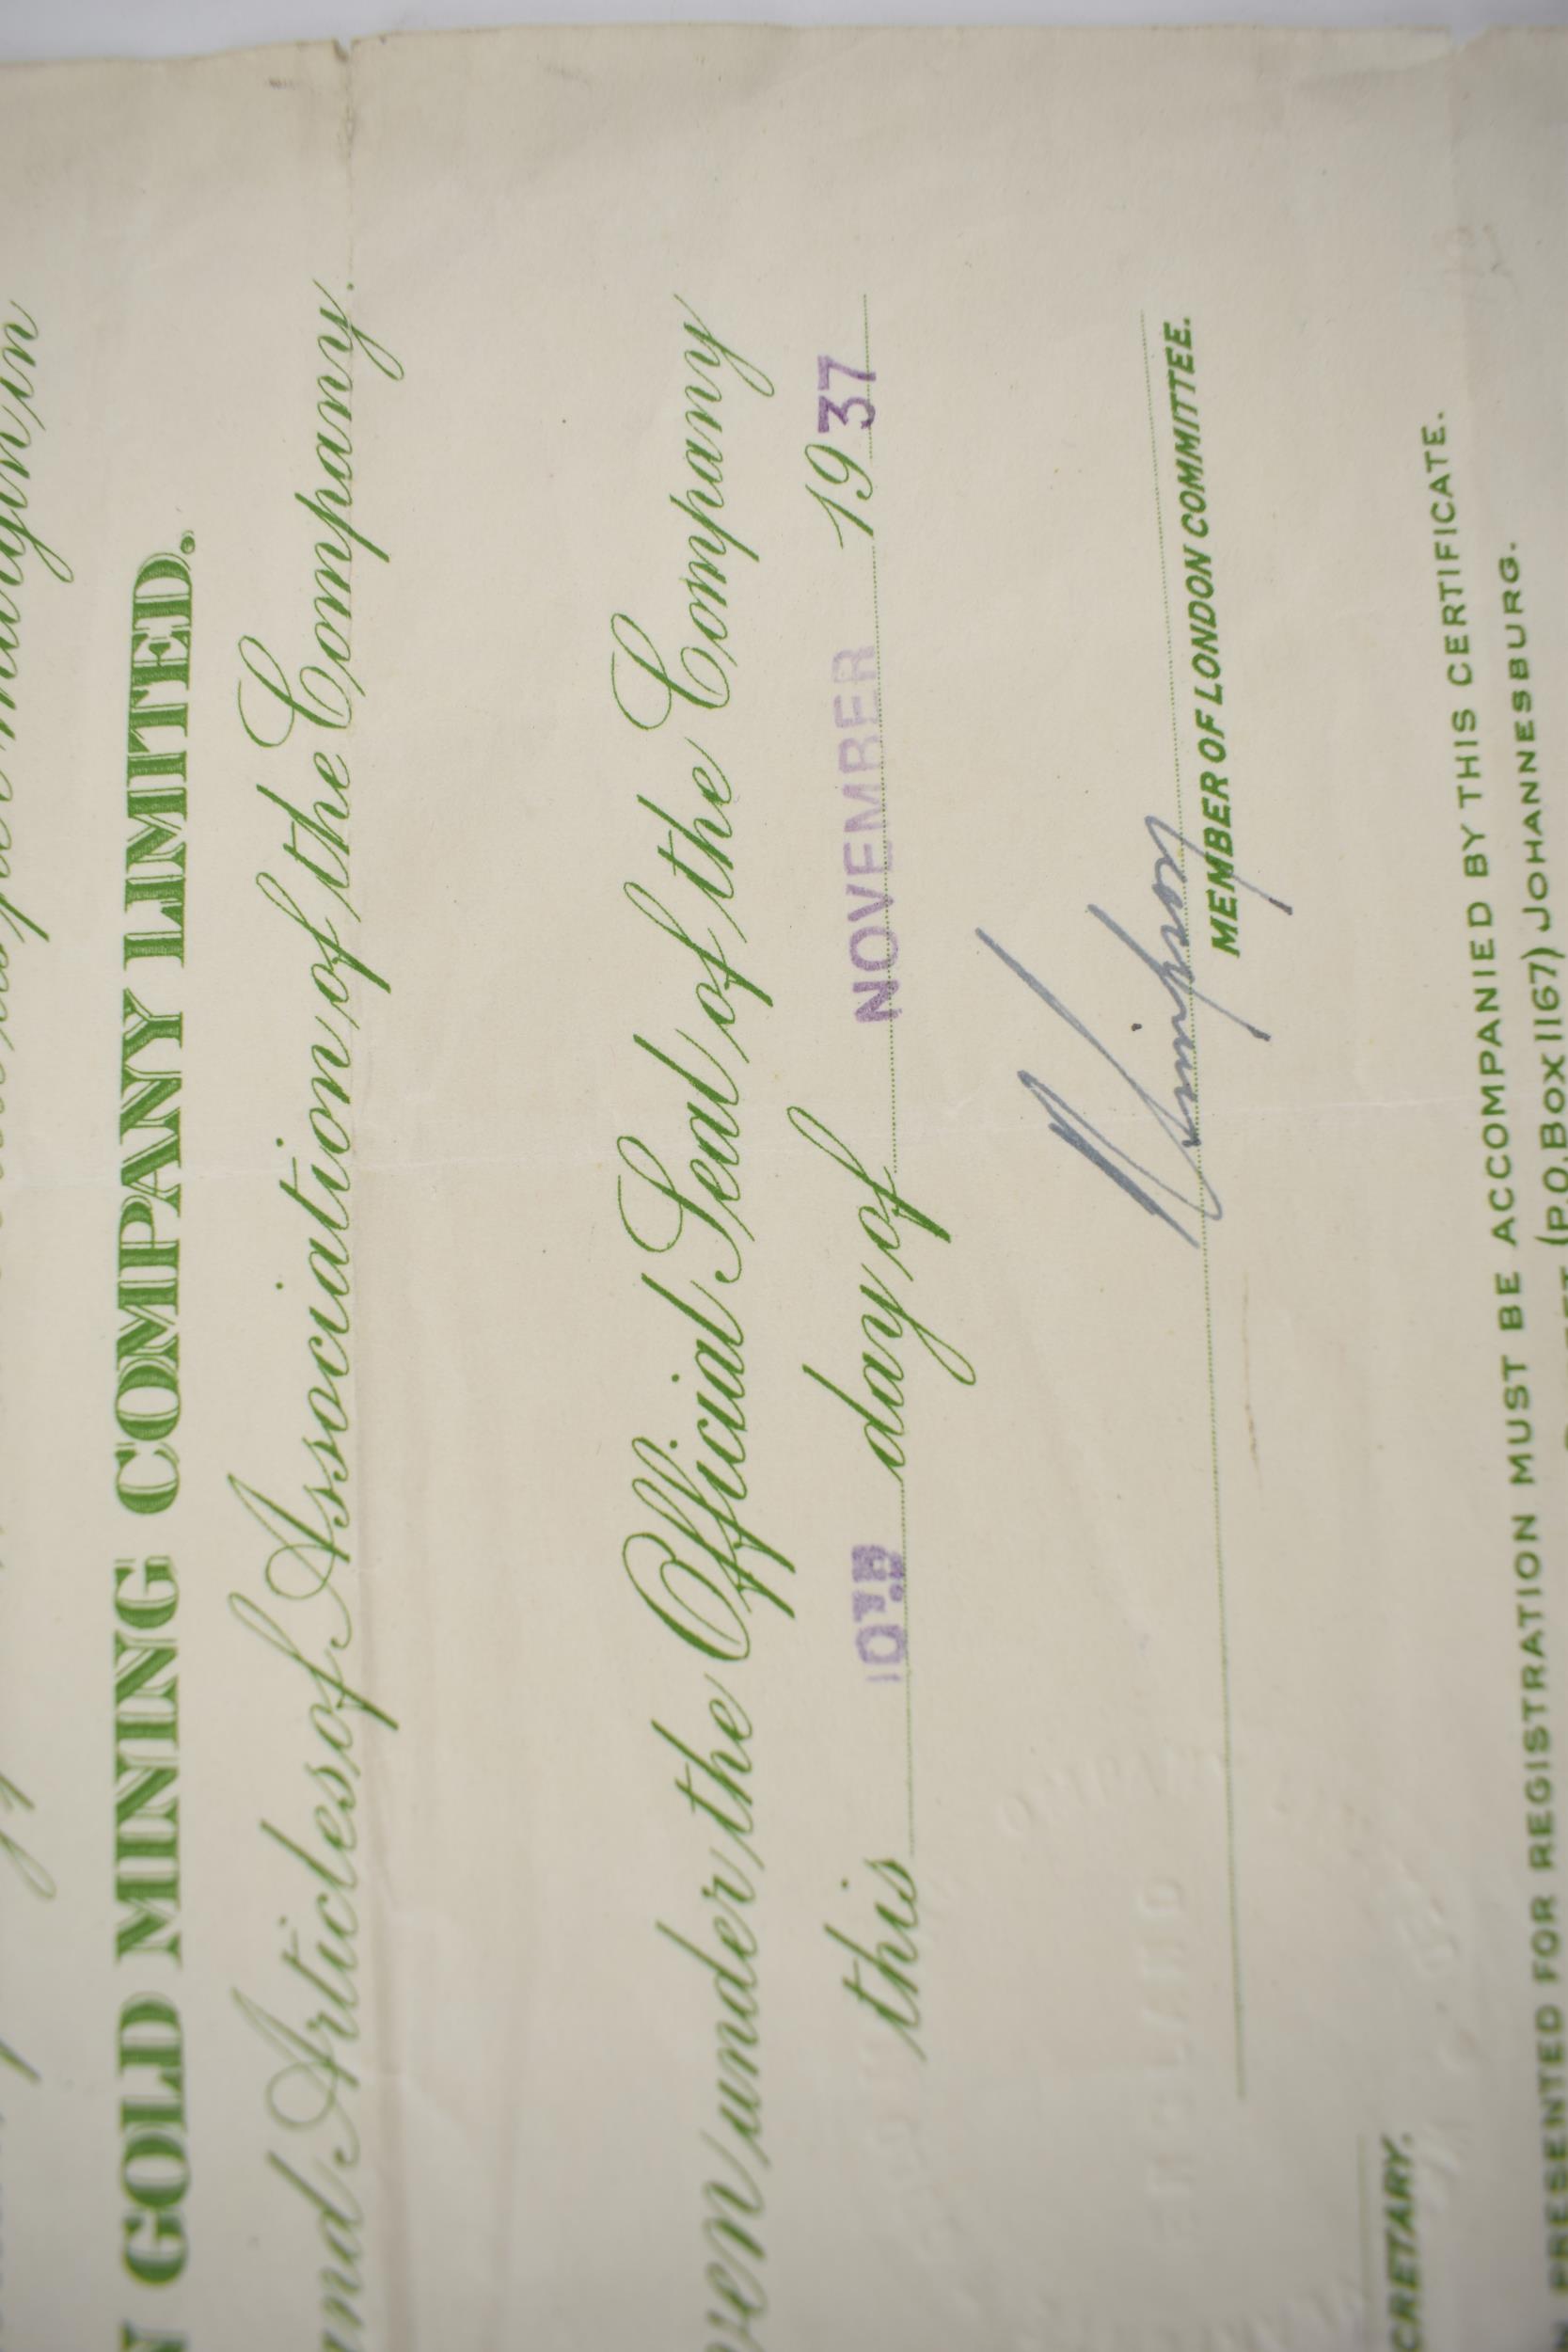 A WEST VLAKFONTEIN Gold Mining Company Limited Shares Certificated dated 10th November 1937. - Image 3 of 4